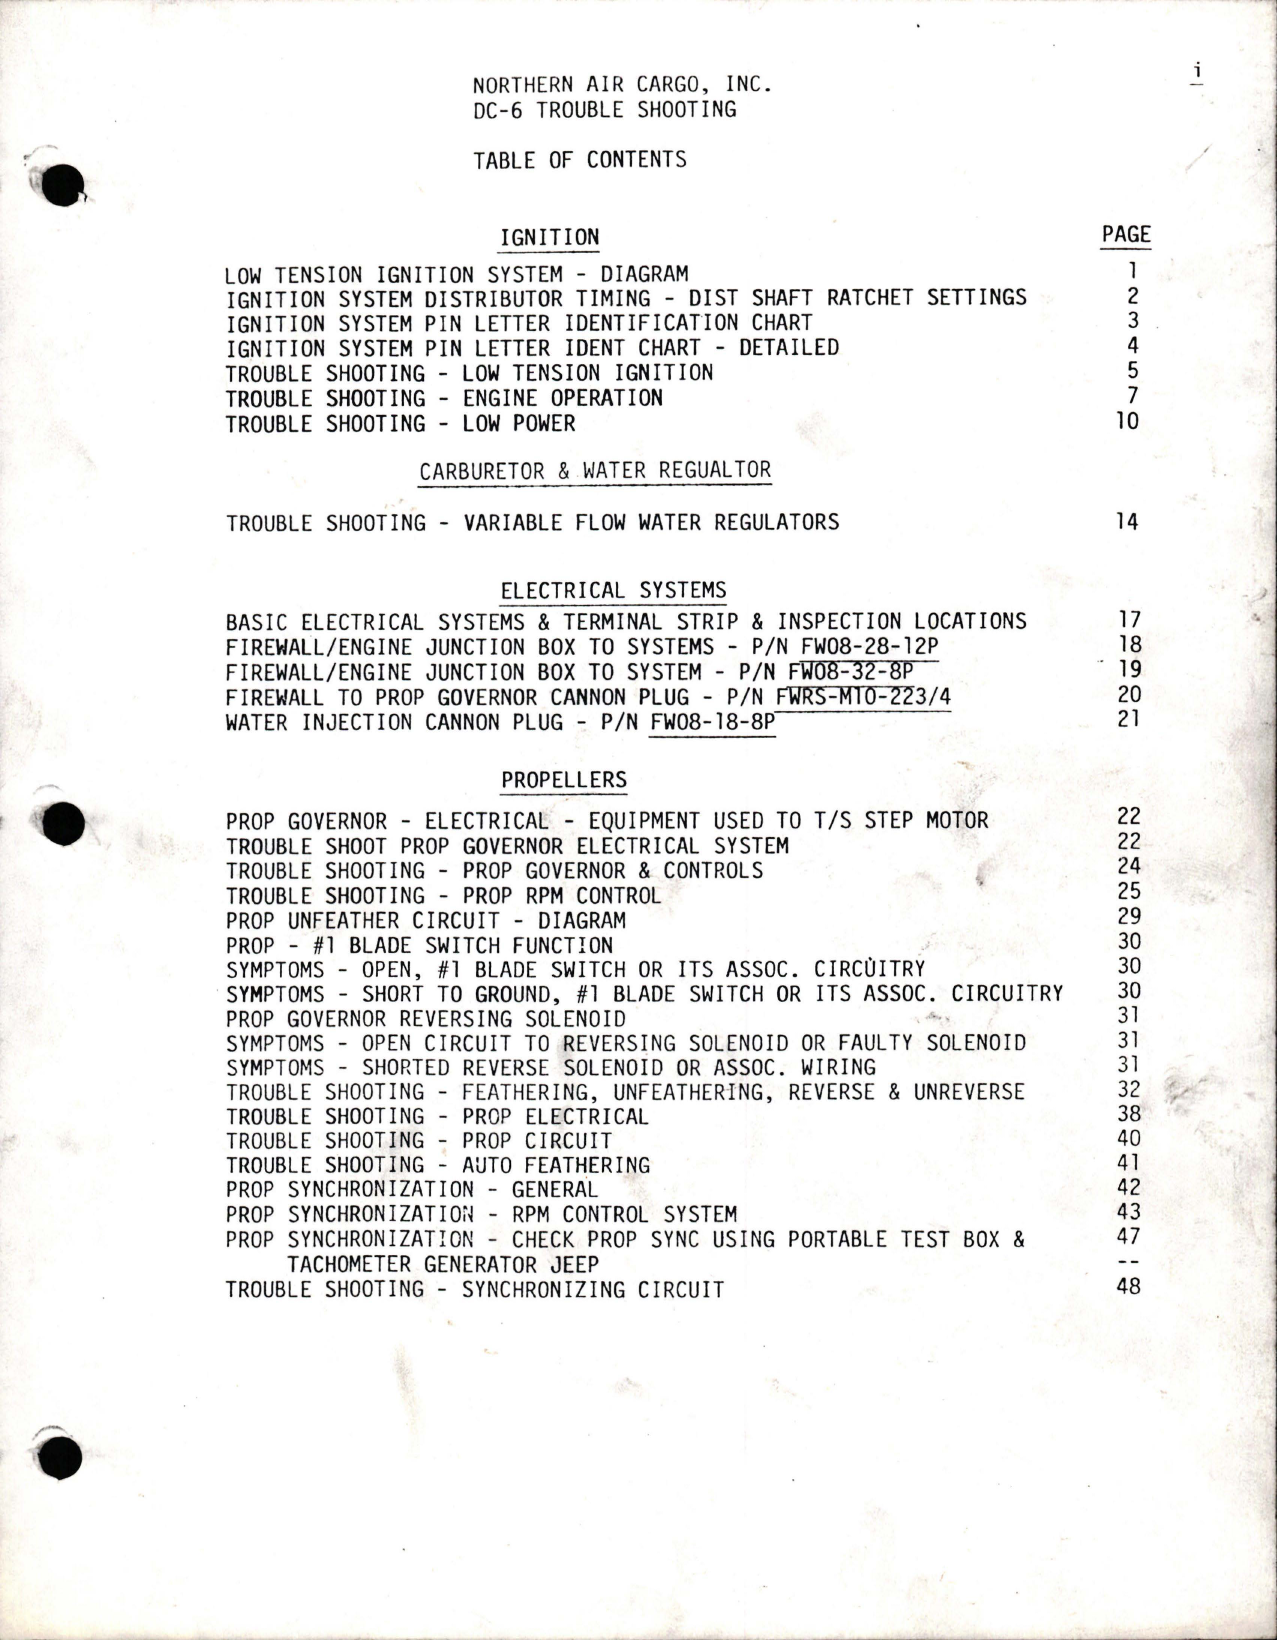 Sample page 1 from AirCorps Library document: Trouble Shooting for D-6